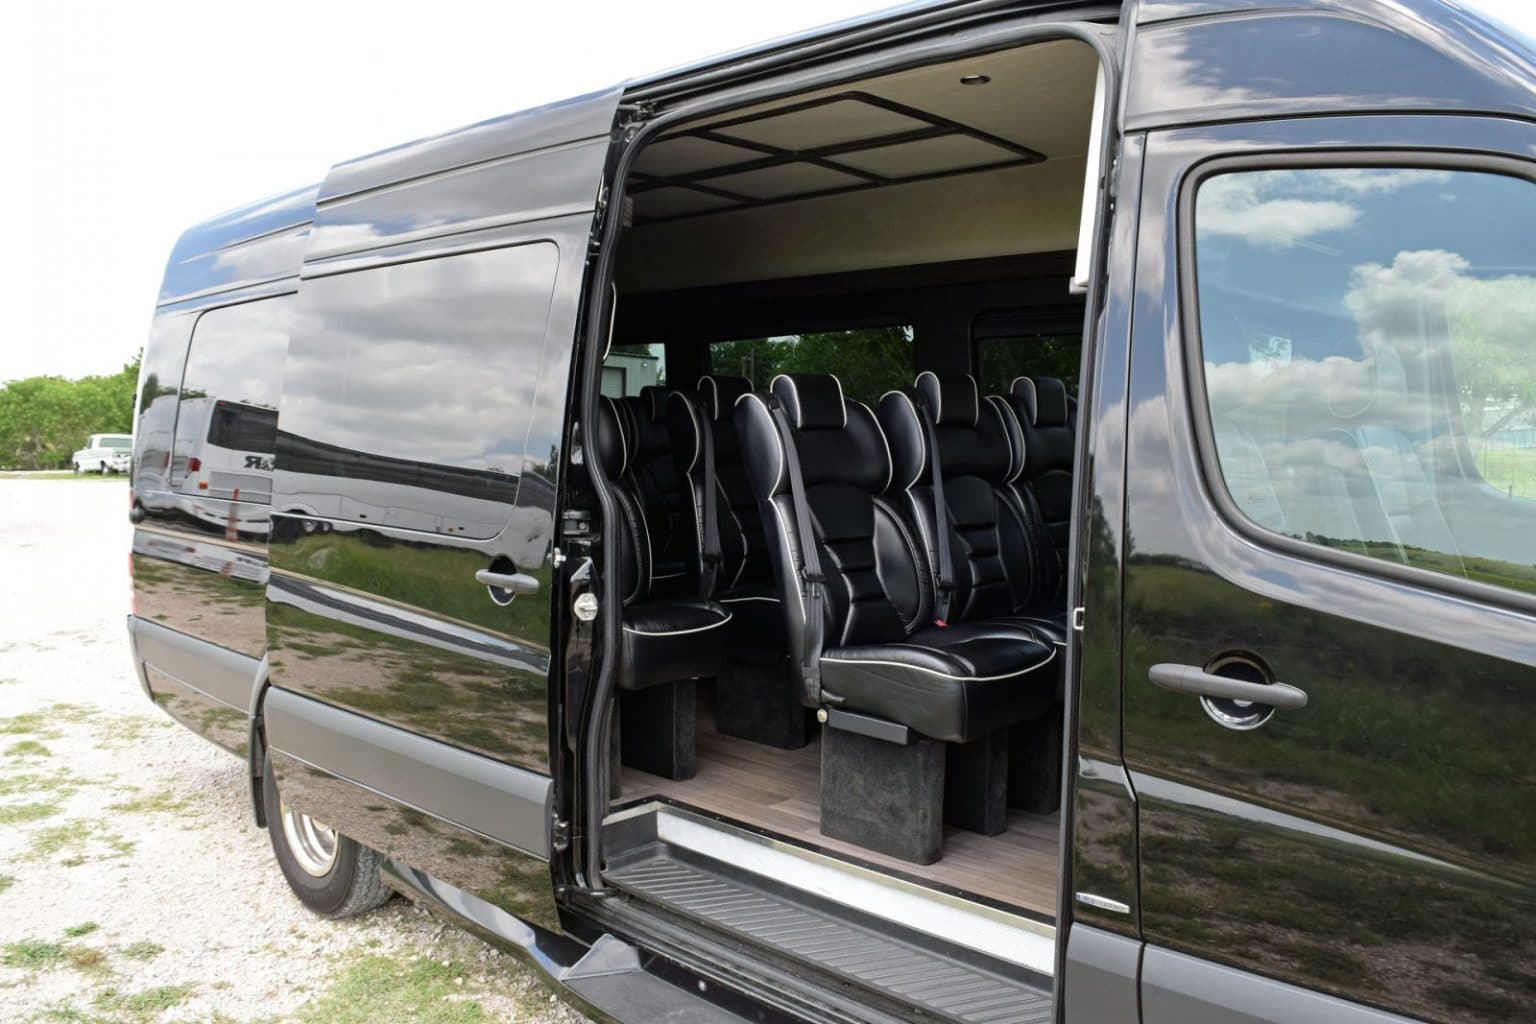 Austin Mercedes Sprinter Van Rental Pricing, Austin Mercedes Sprinter Van for Rent, Best, Top, Travel, Vacation, Local, Cargo, Sports Teams, Business, Limo, Executive, Lowest Rates, Daily